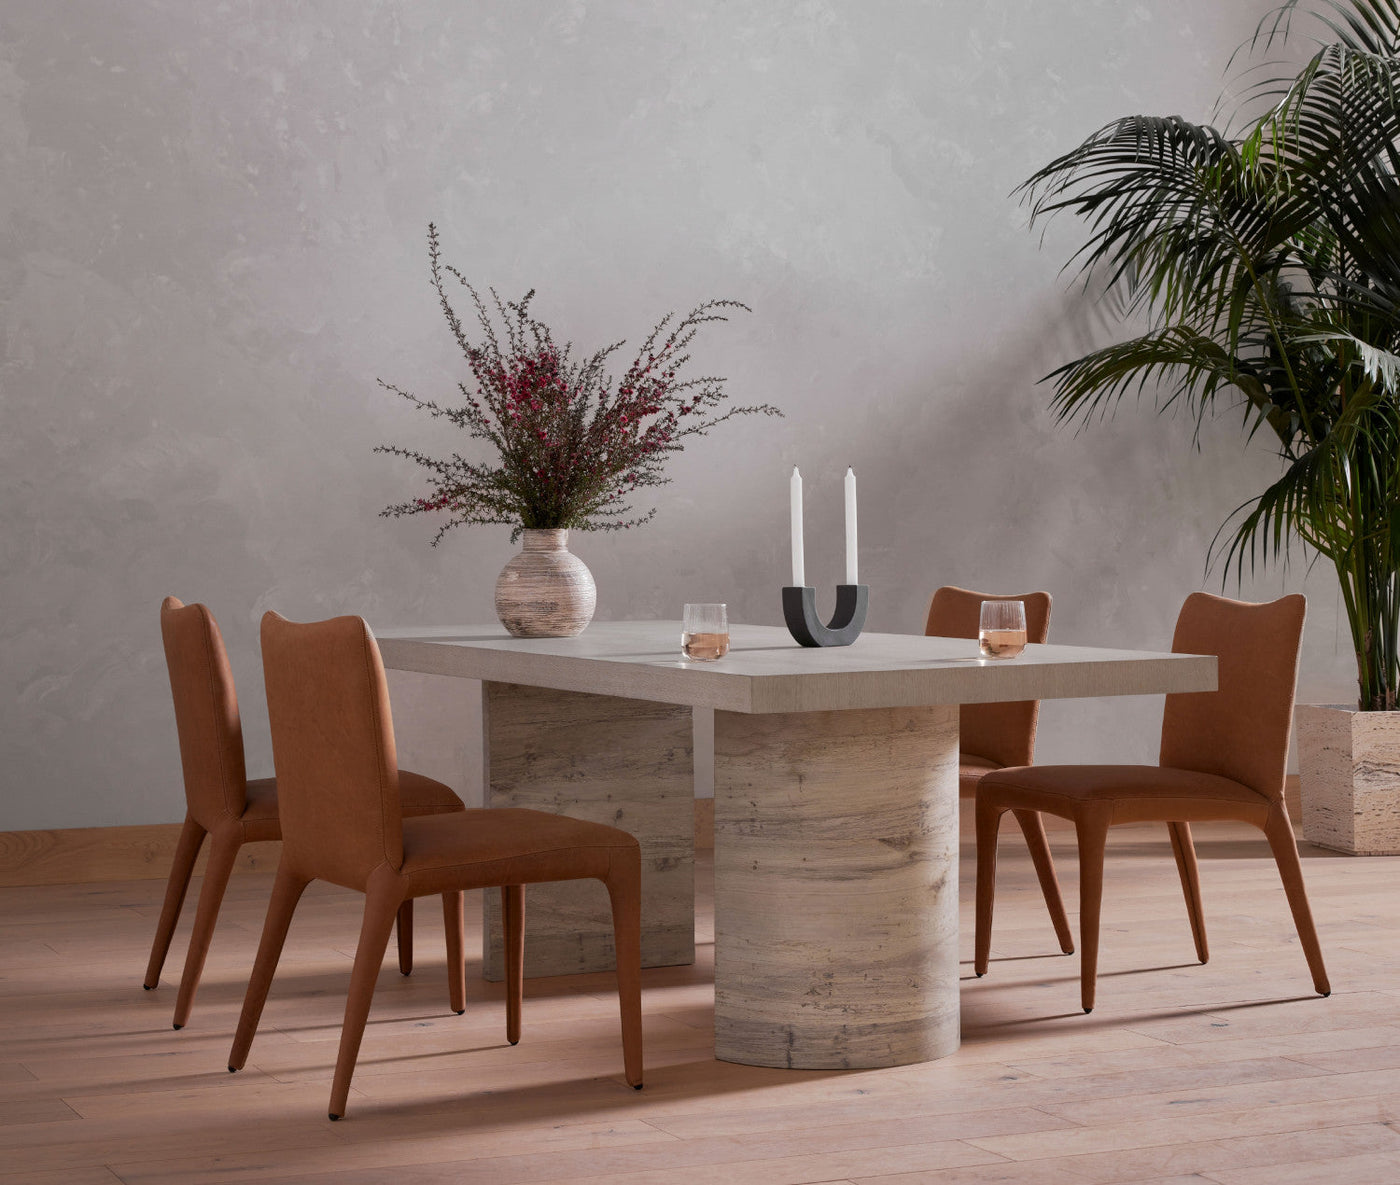 MONZA DINING CHAIR,HERITAGE CAMEL